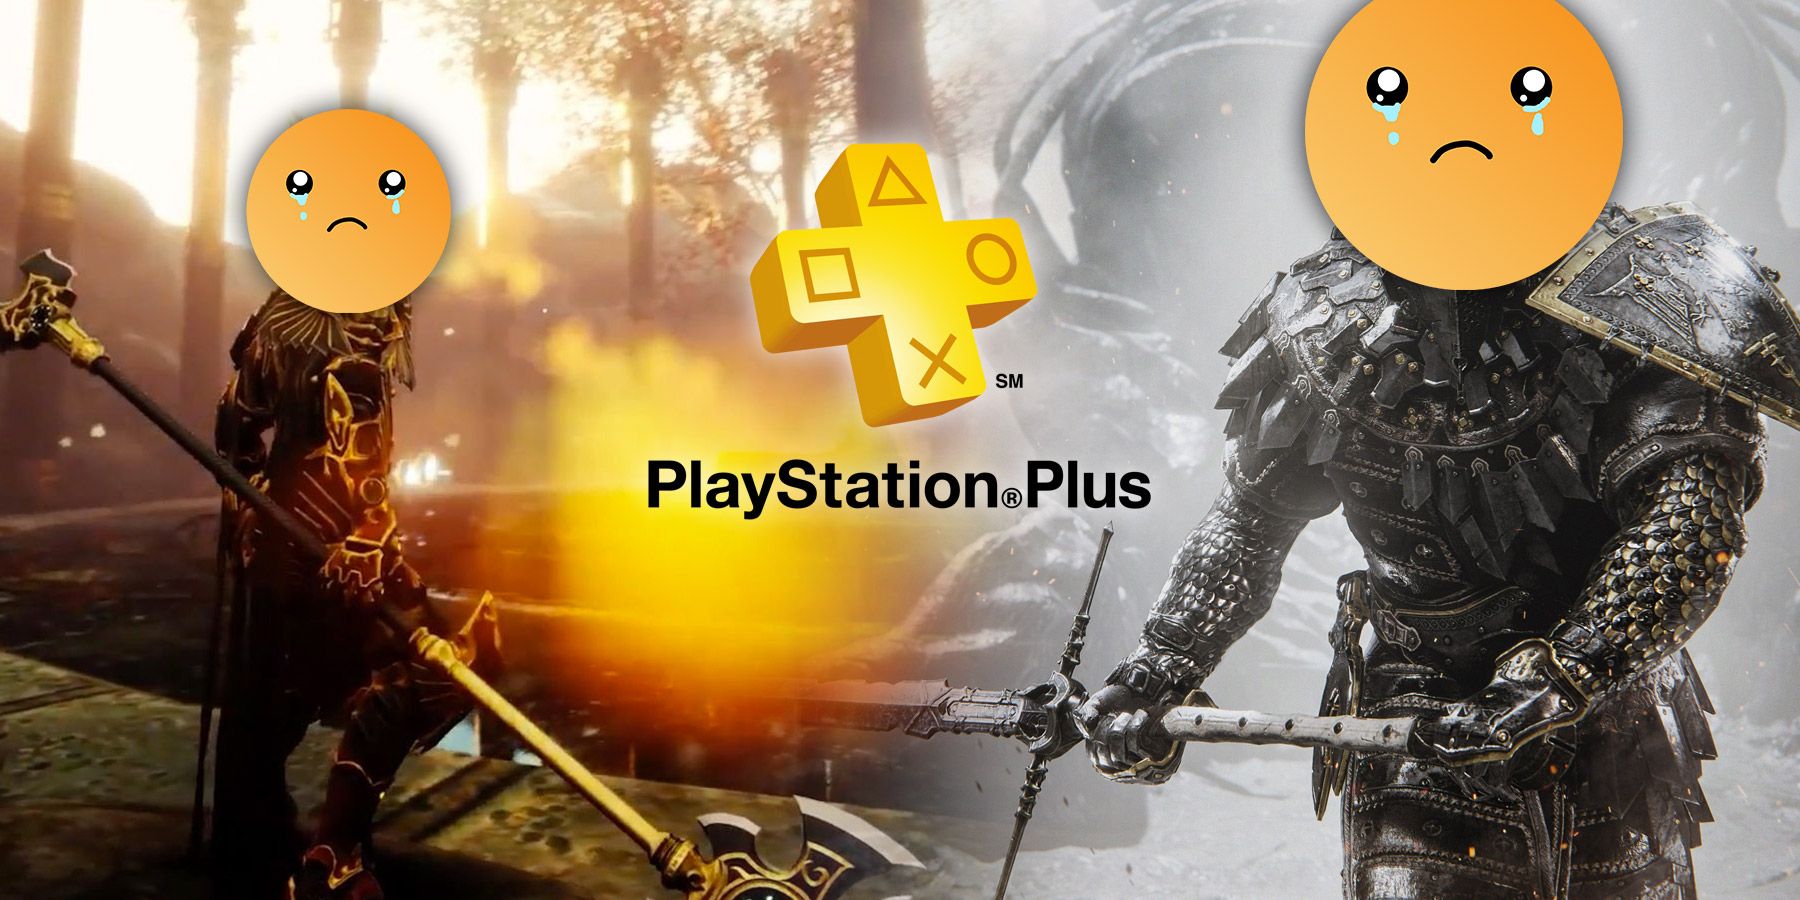 PlayStation Plus on PC is weirdly missing another PS Plus Extra game